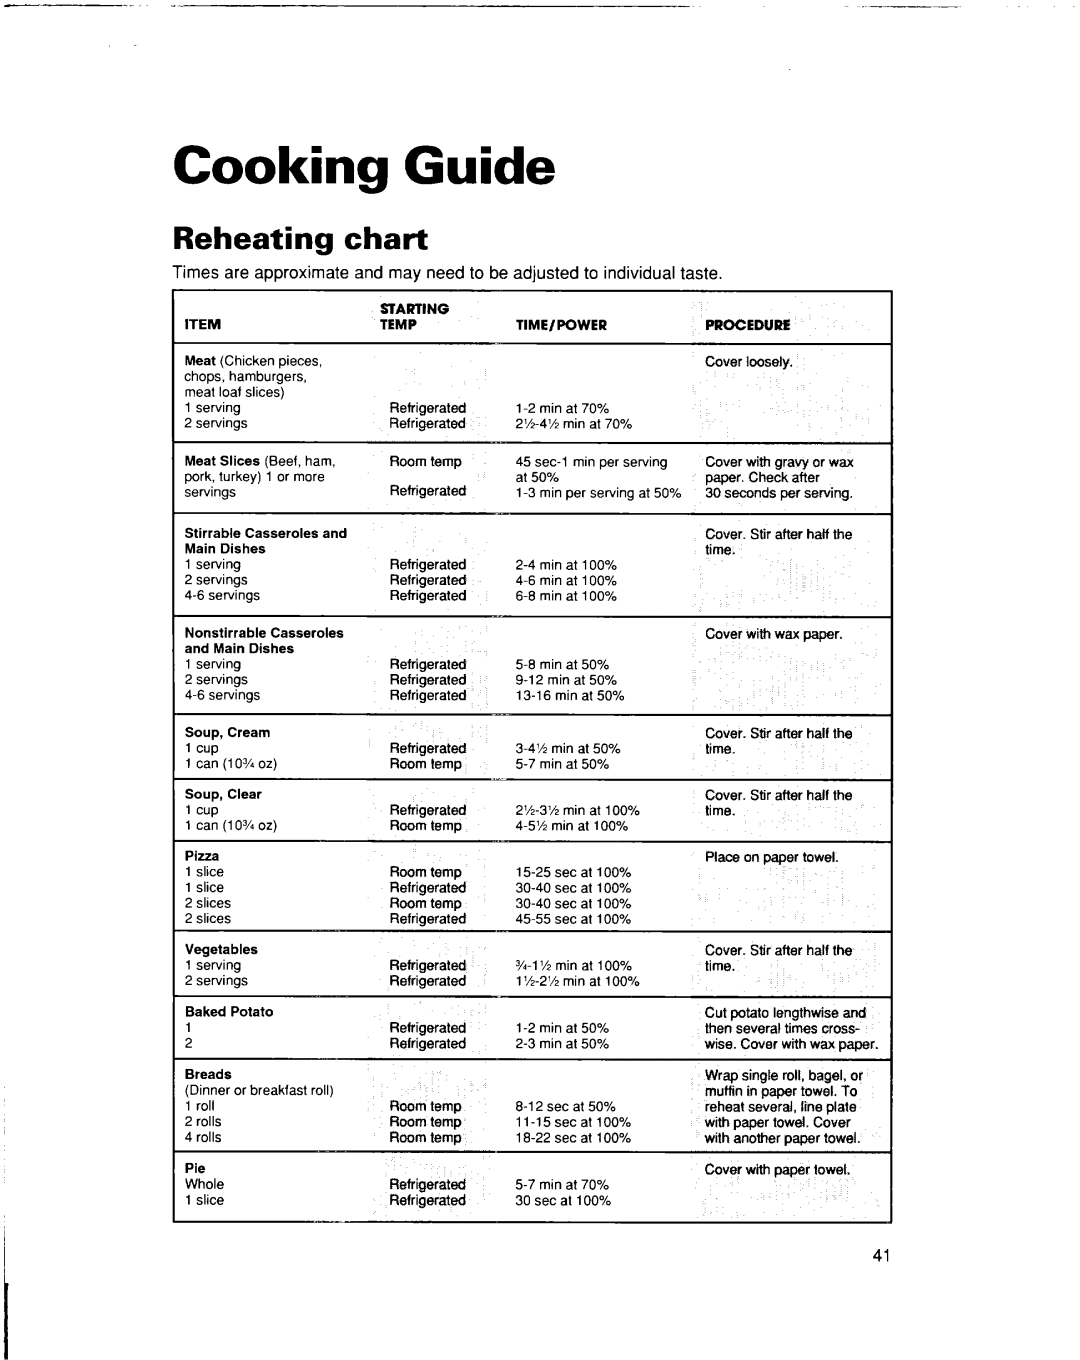 Whirlpool lREB/Q warranty Cooking Guide, Reheating chart 